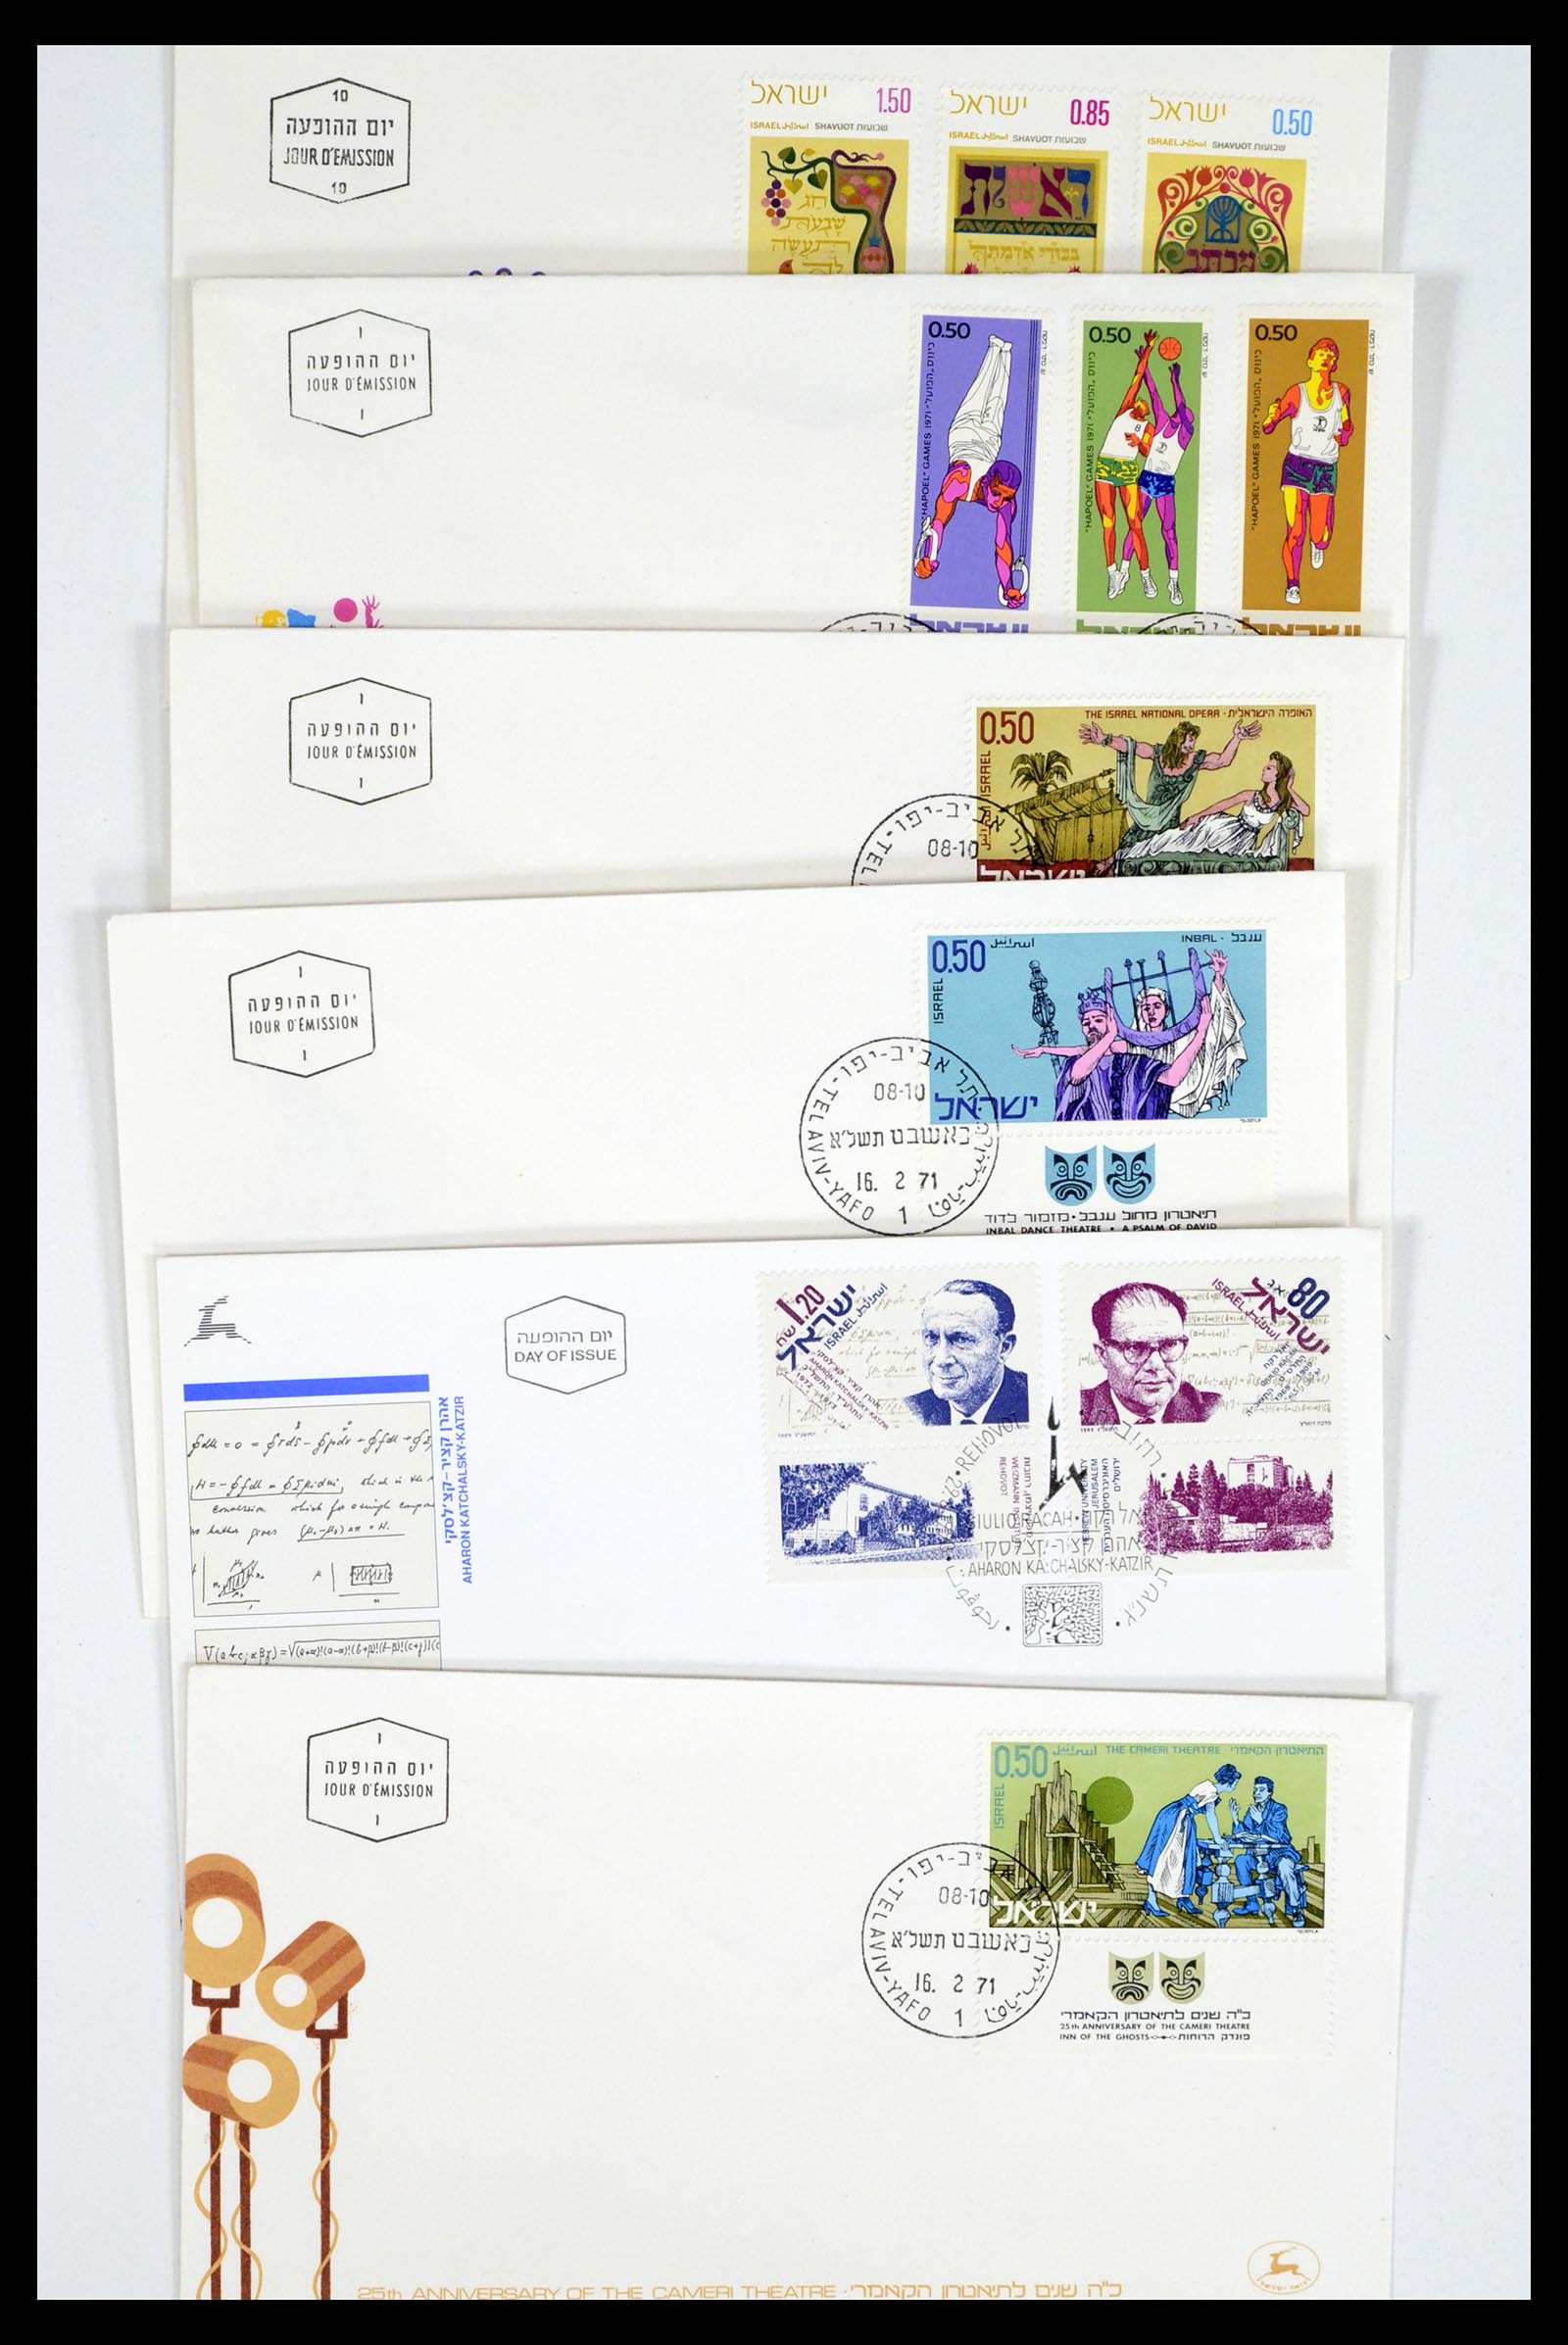 37711 040 - Stamp collection 37711 Israel first day covers 1970-2000.